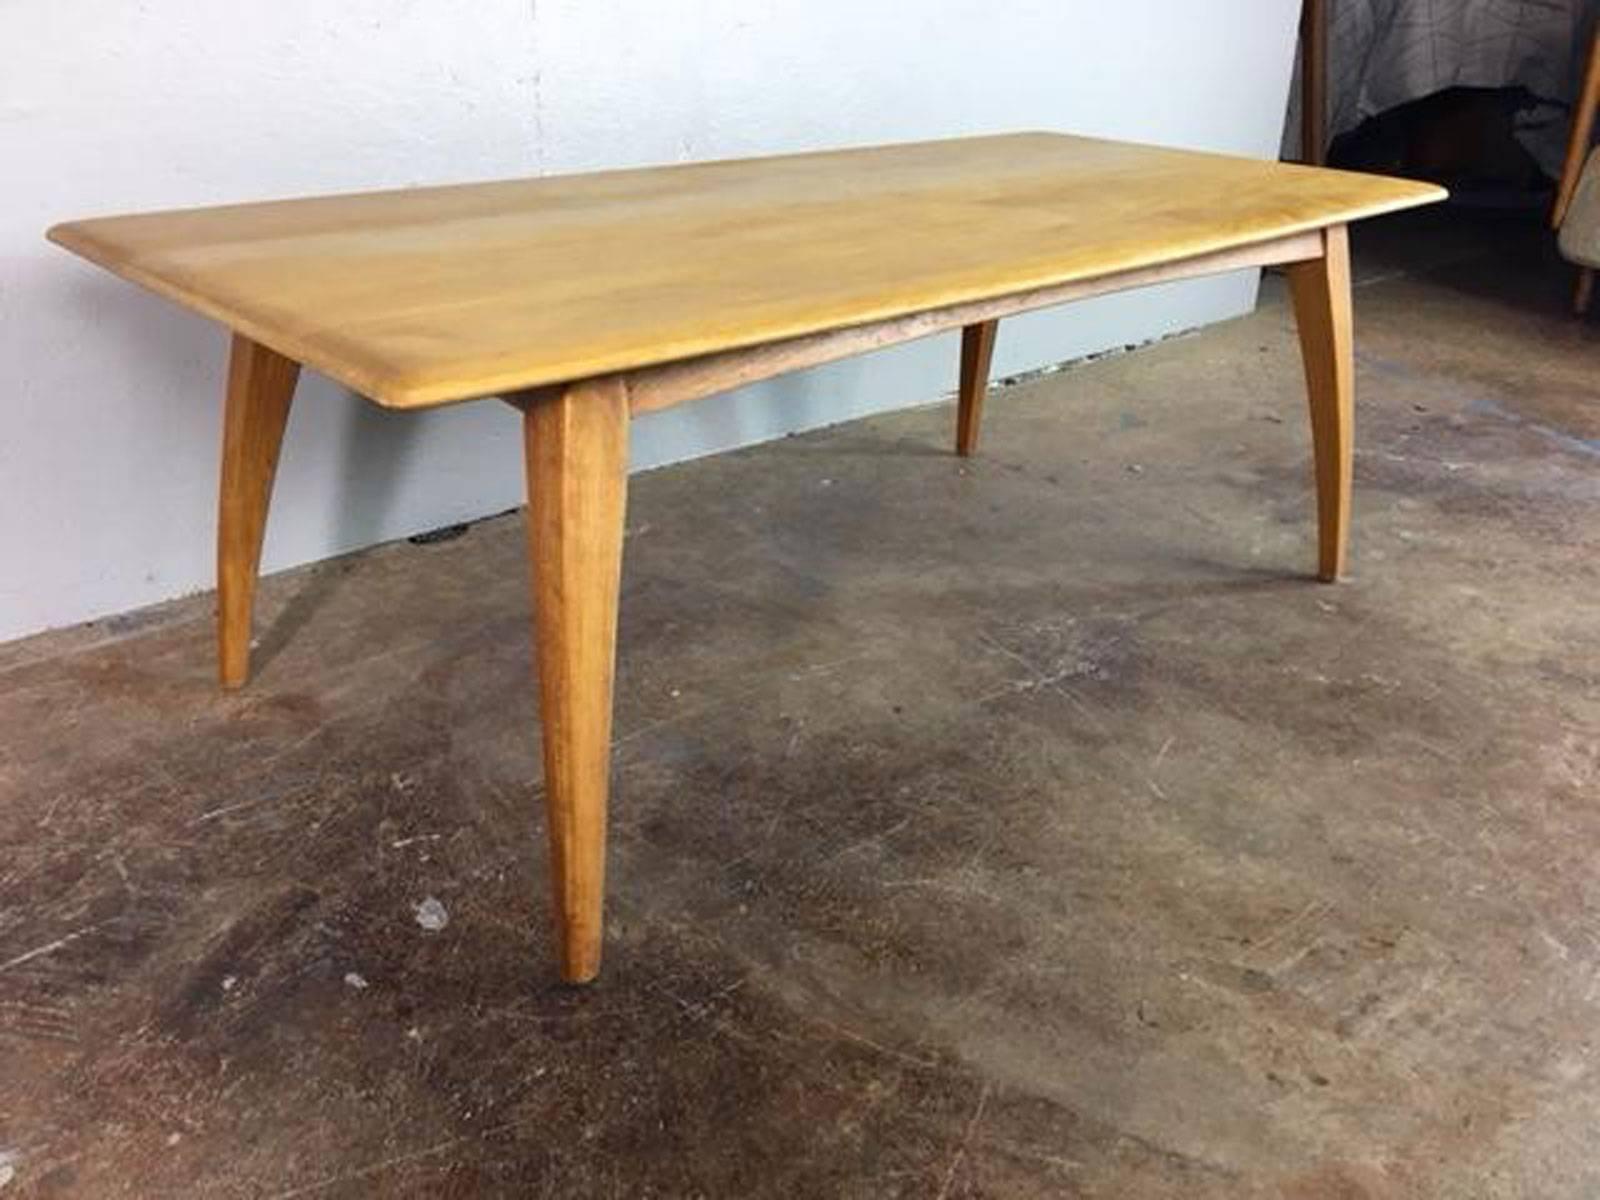 Heywood Wakefield coffee table in original very good overall condition.